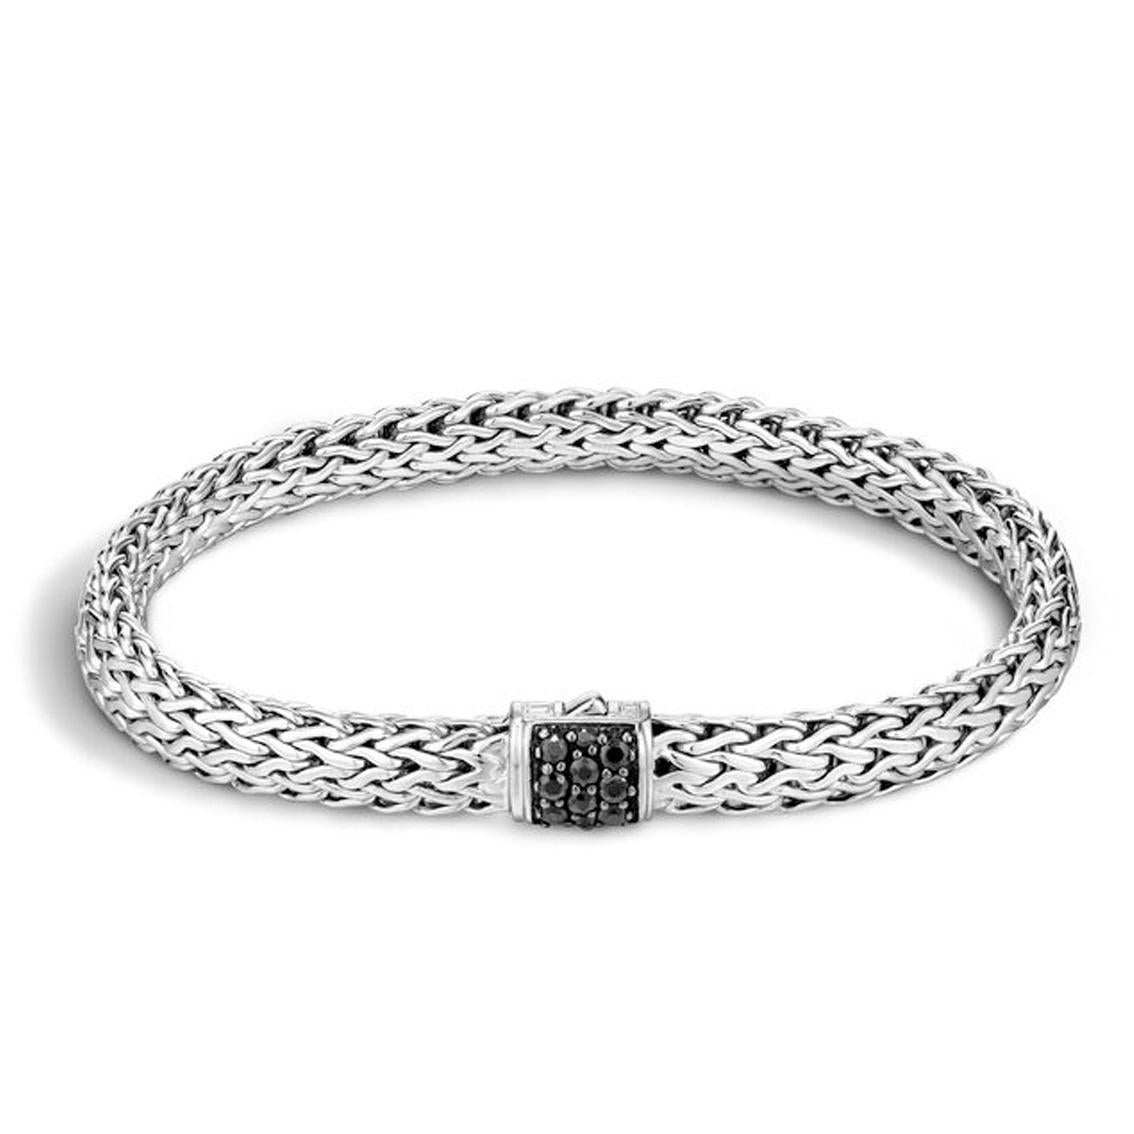 From John Hardy's Classic Chain collection, this sterling silver bracelet features a black sapphire pave set pusher clasp. The bracelet measures 5mm in width and has a length of 6.5 inches.